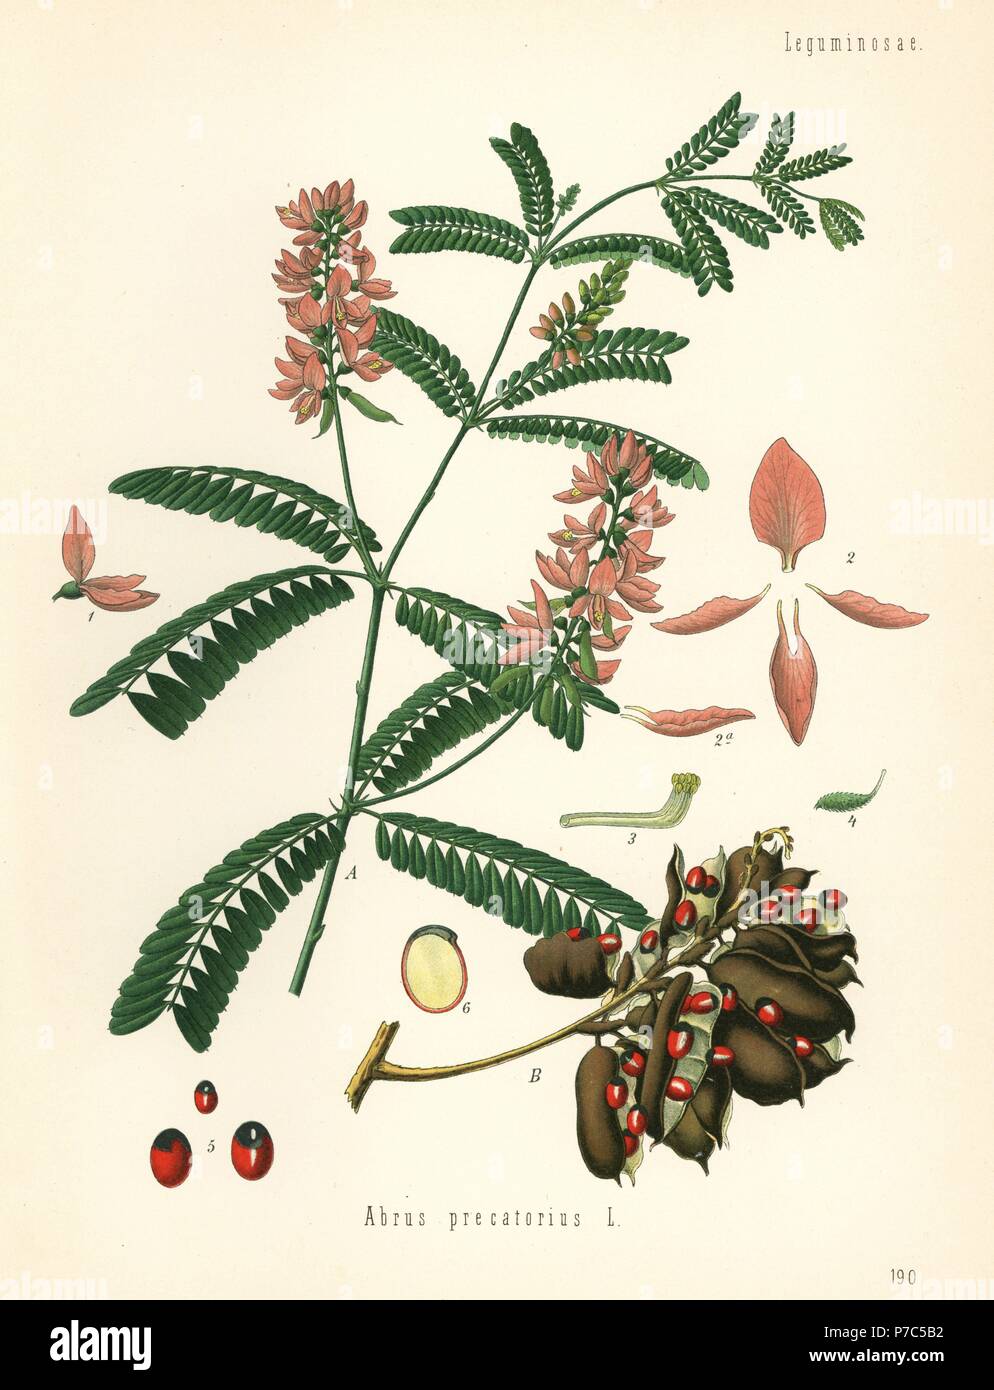 Indian licorice, Abrus precatorius. Chromolithograph after a botanical illustration from Hermann Adolph Koehler's Medicinal Plants, edited by Gustav Pabst, Koehler, Germany, 1887. Stock Photo